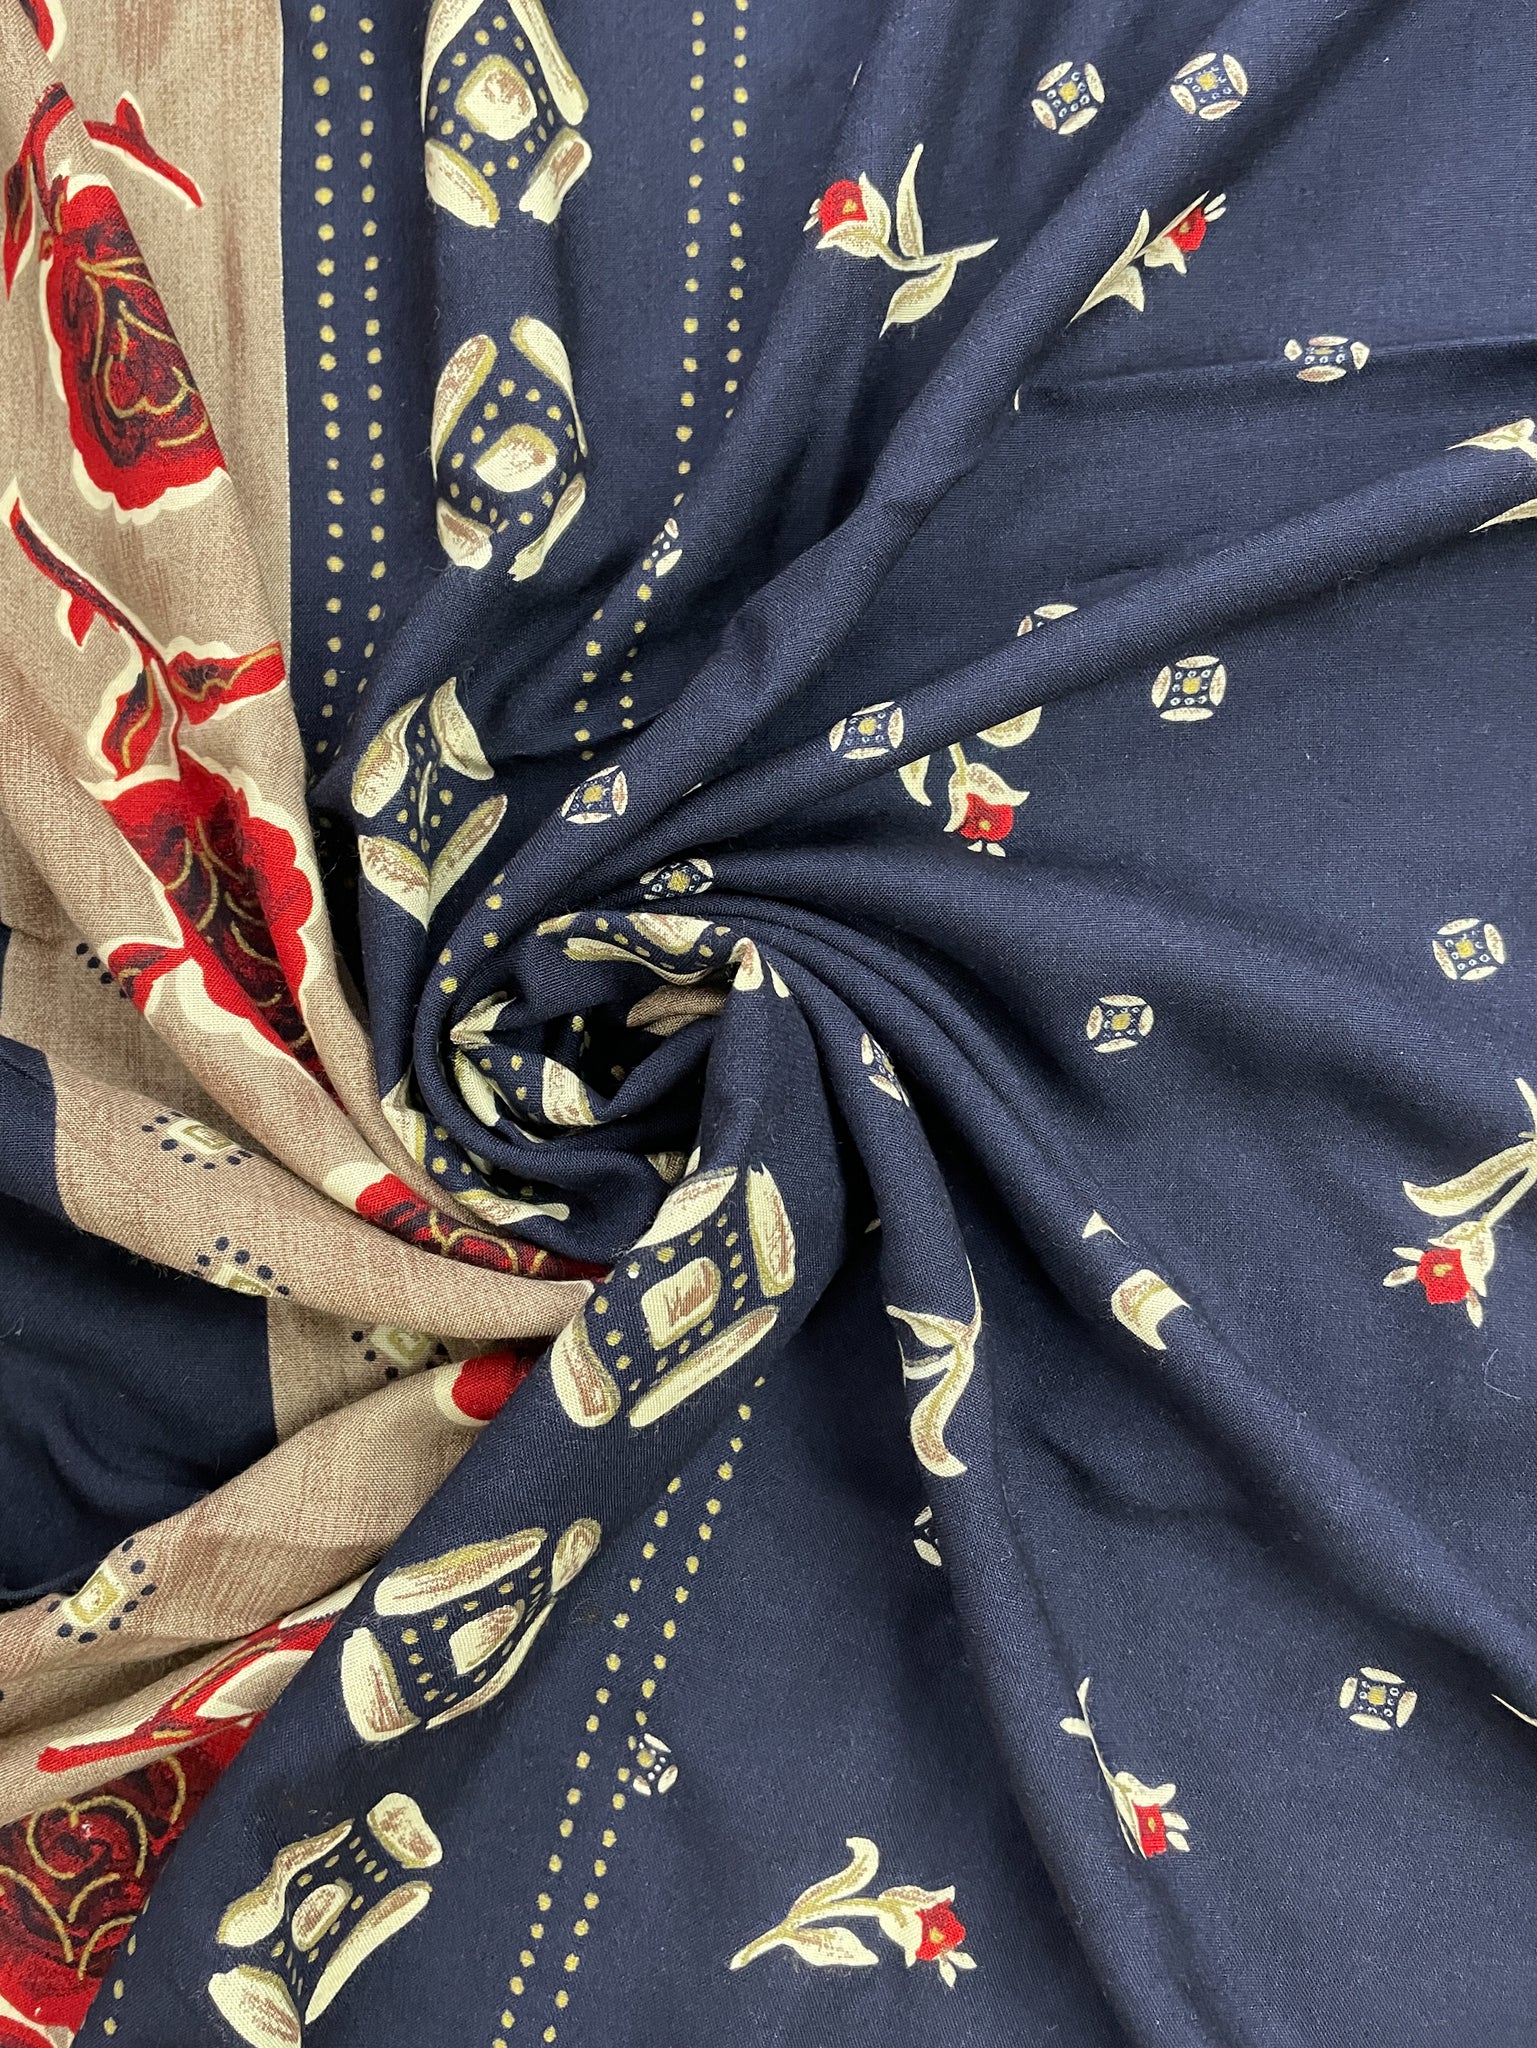 2 1/4 YD Rayon with Border Vintage - Navy Blue with Flowers